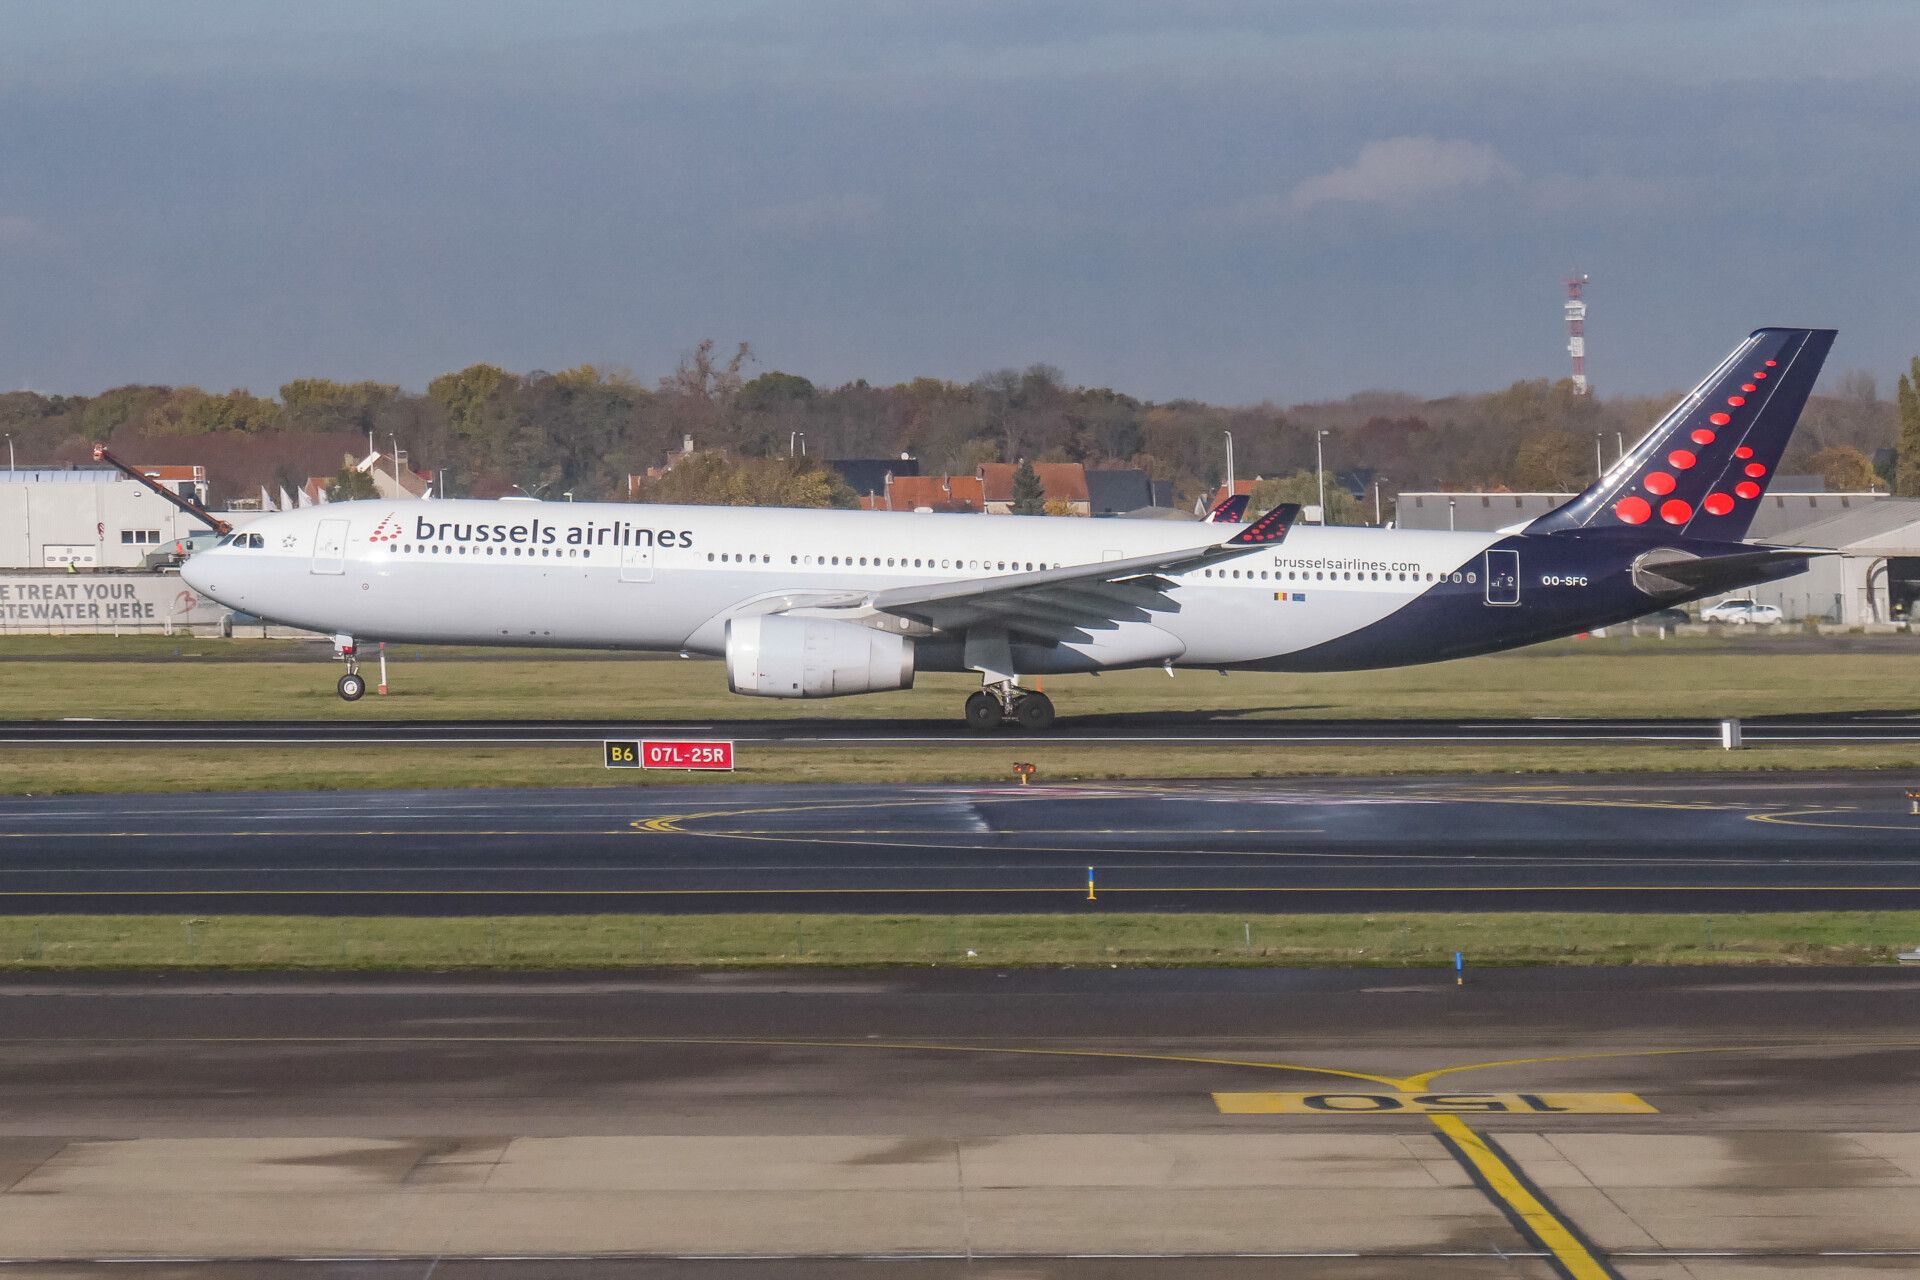 Brussels Airlines Airbus A330-300 